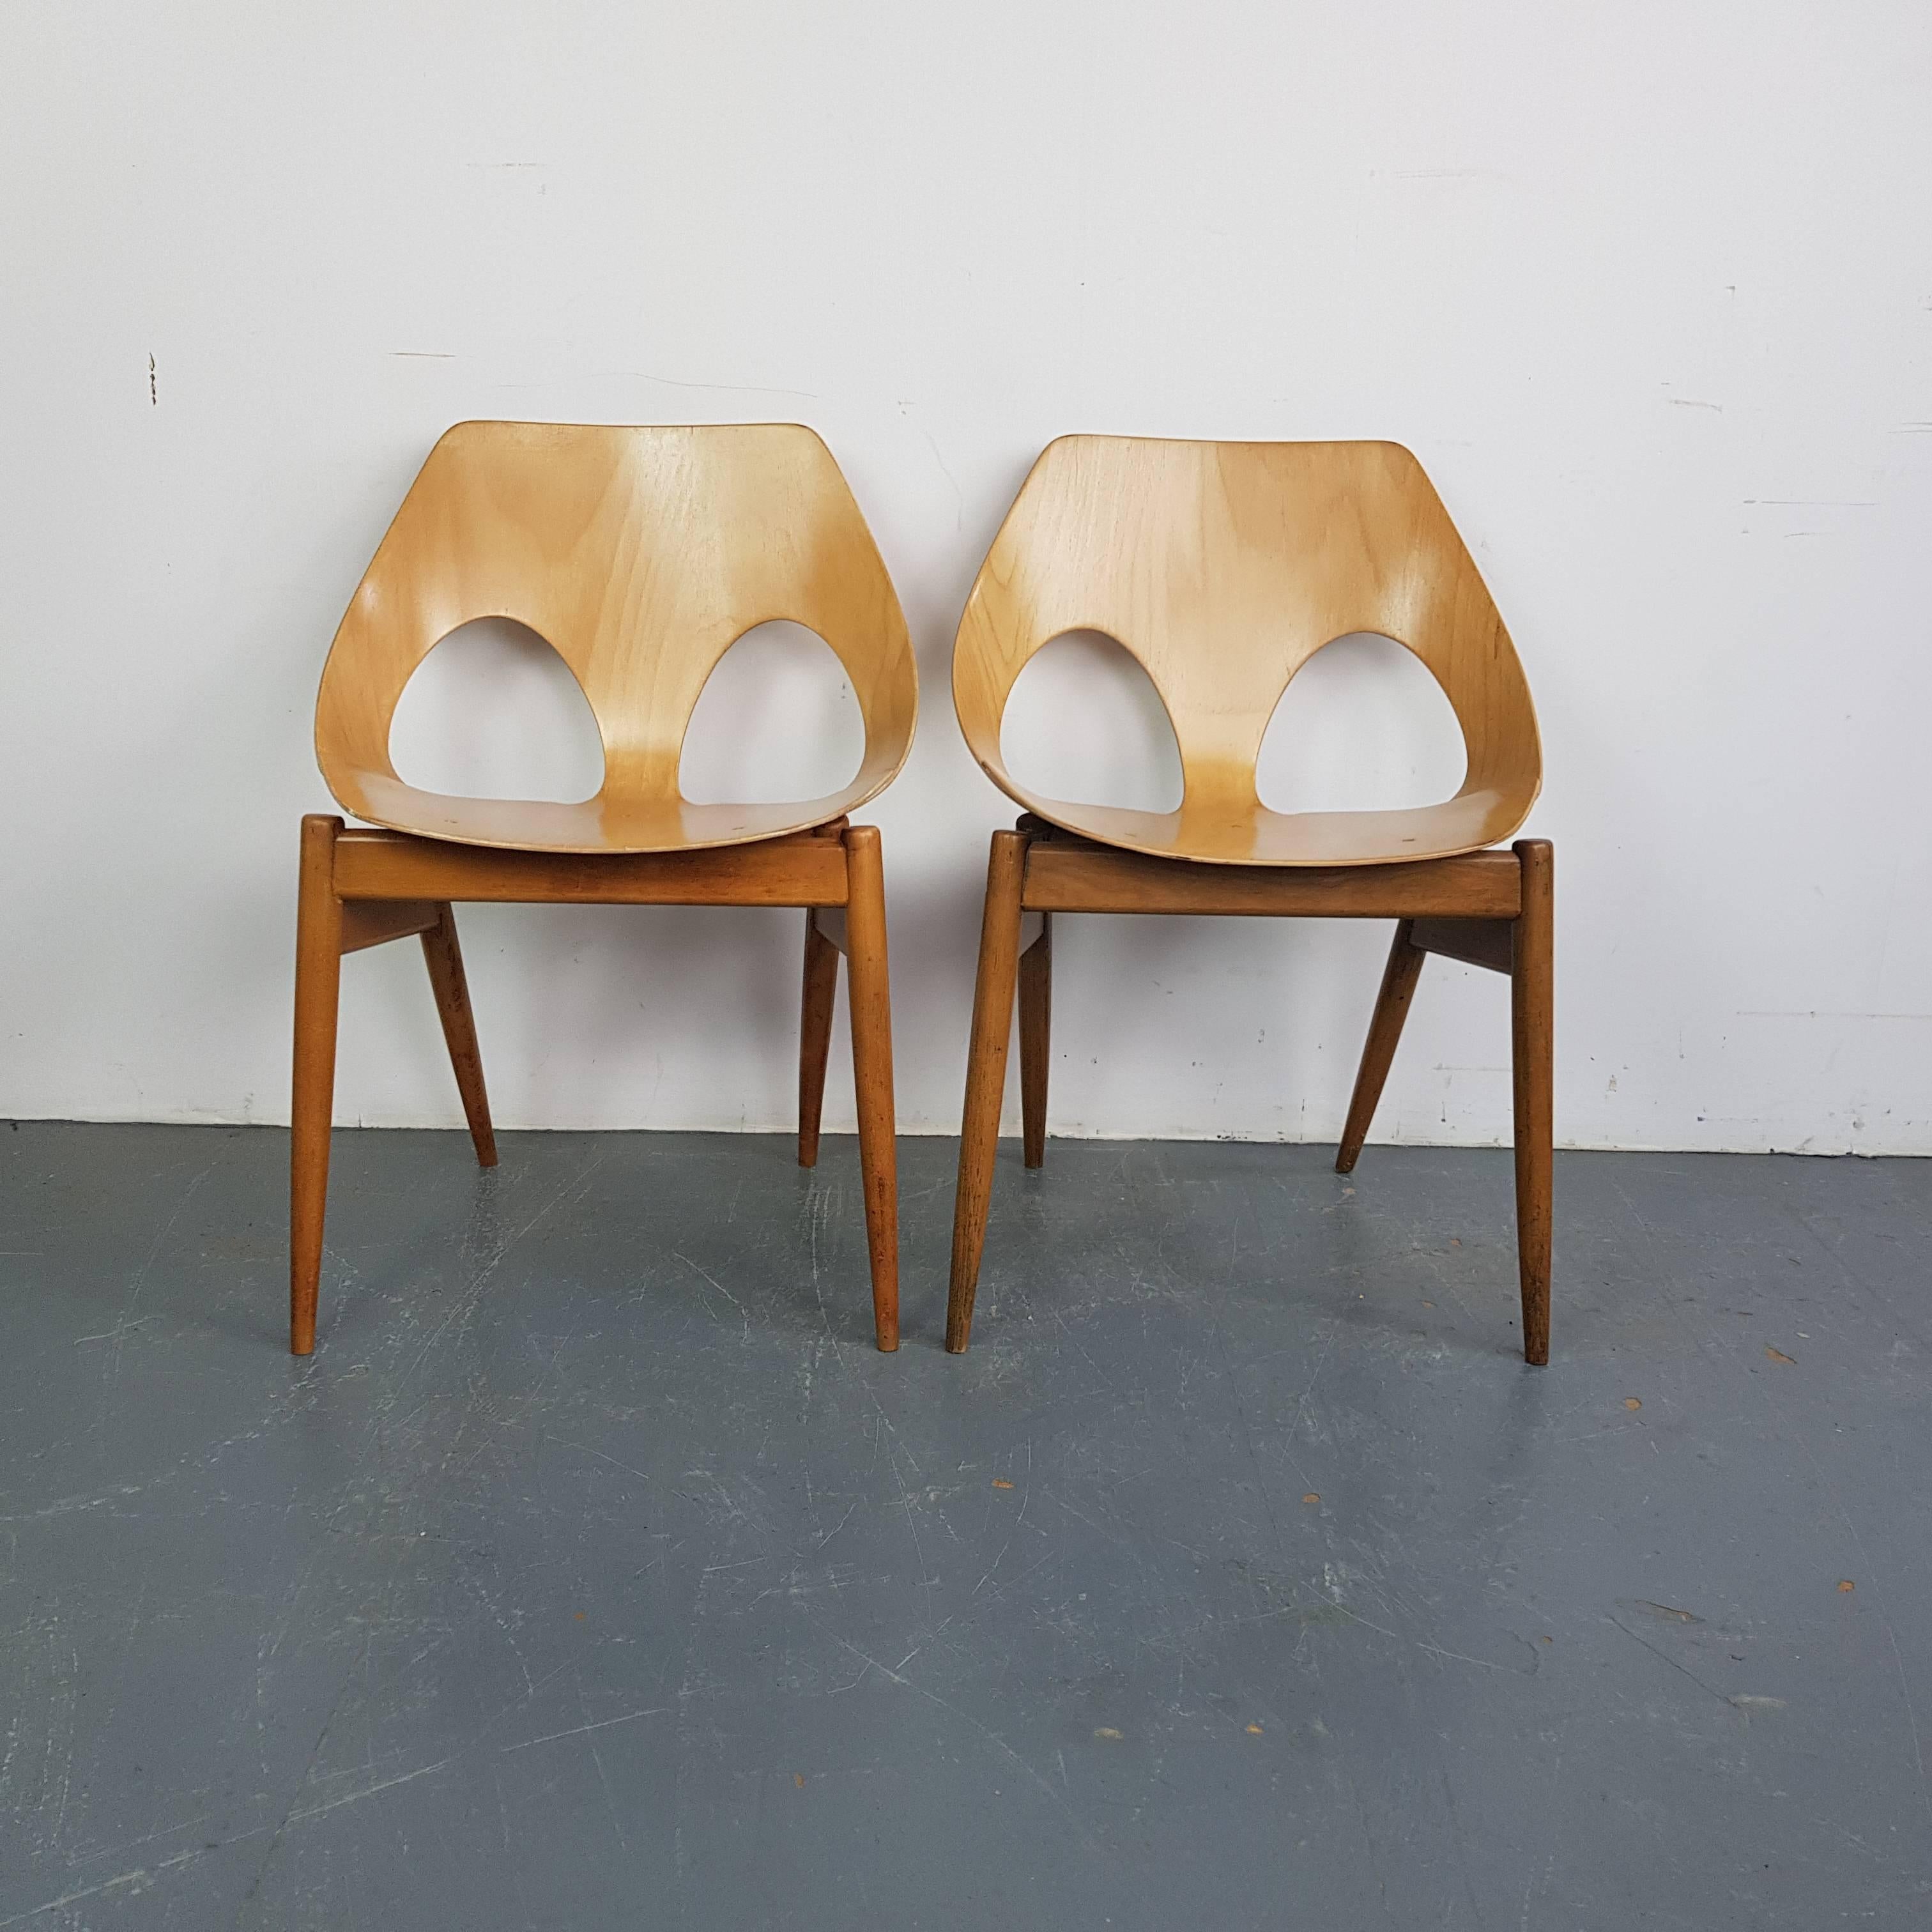 A pair of 1950s Jason chairs designed by Carl Jacobs for Kandya.

The Jason chair was designed by the Danish designer Carl Jacobs but was manufactured by Kandya, a British firm. This lightweight, stackable, chair has gently tapering splayed wooden